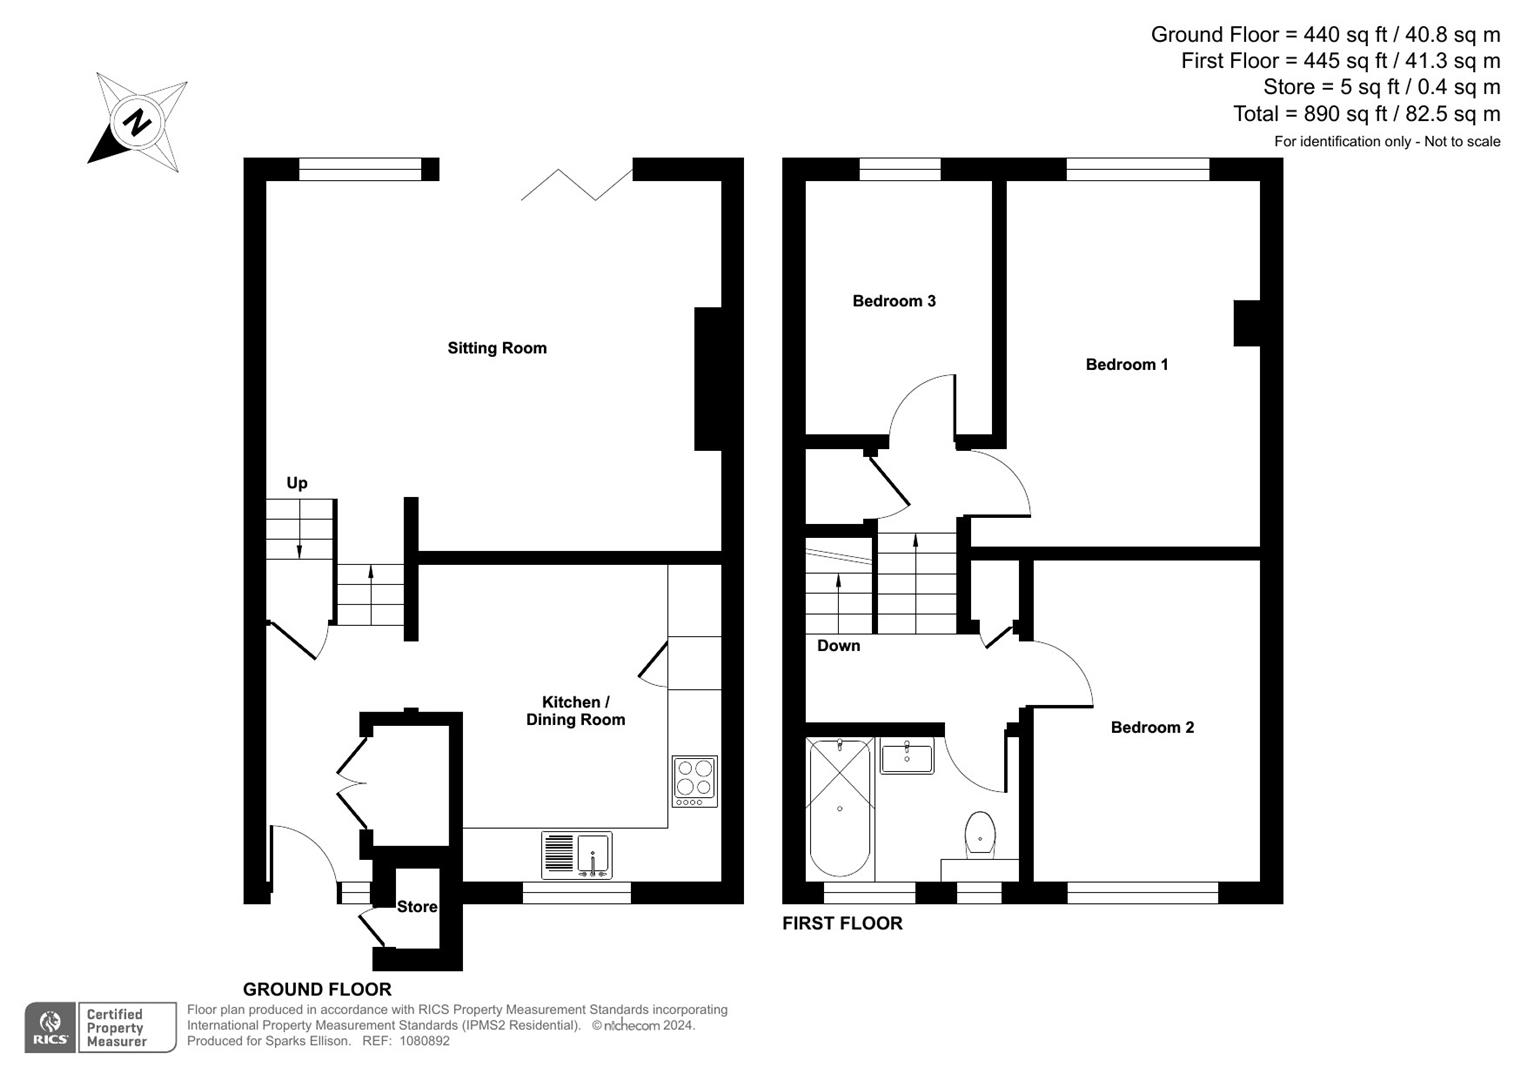 Bodycoats Road, Chandler’s Ford floorplan